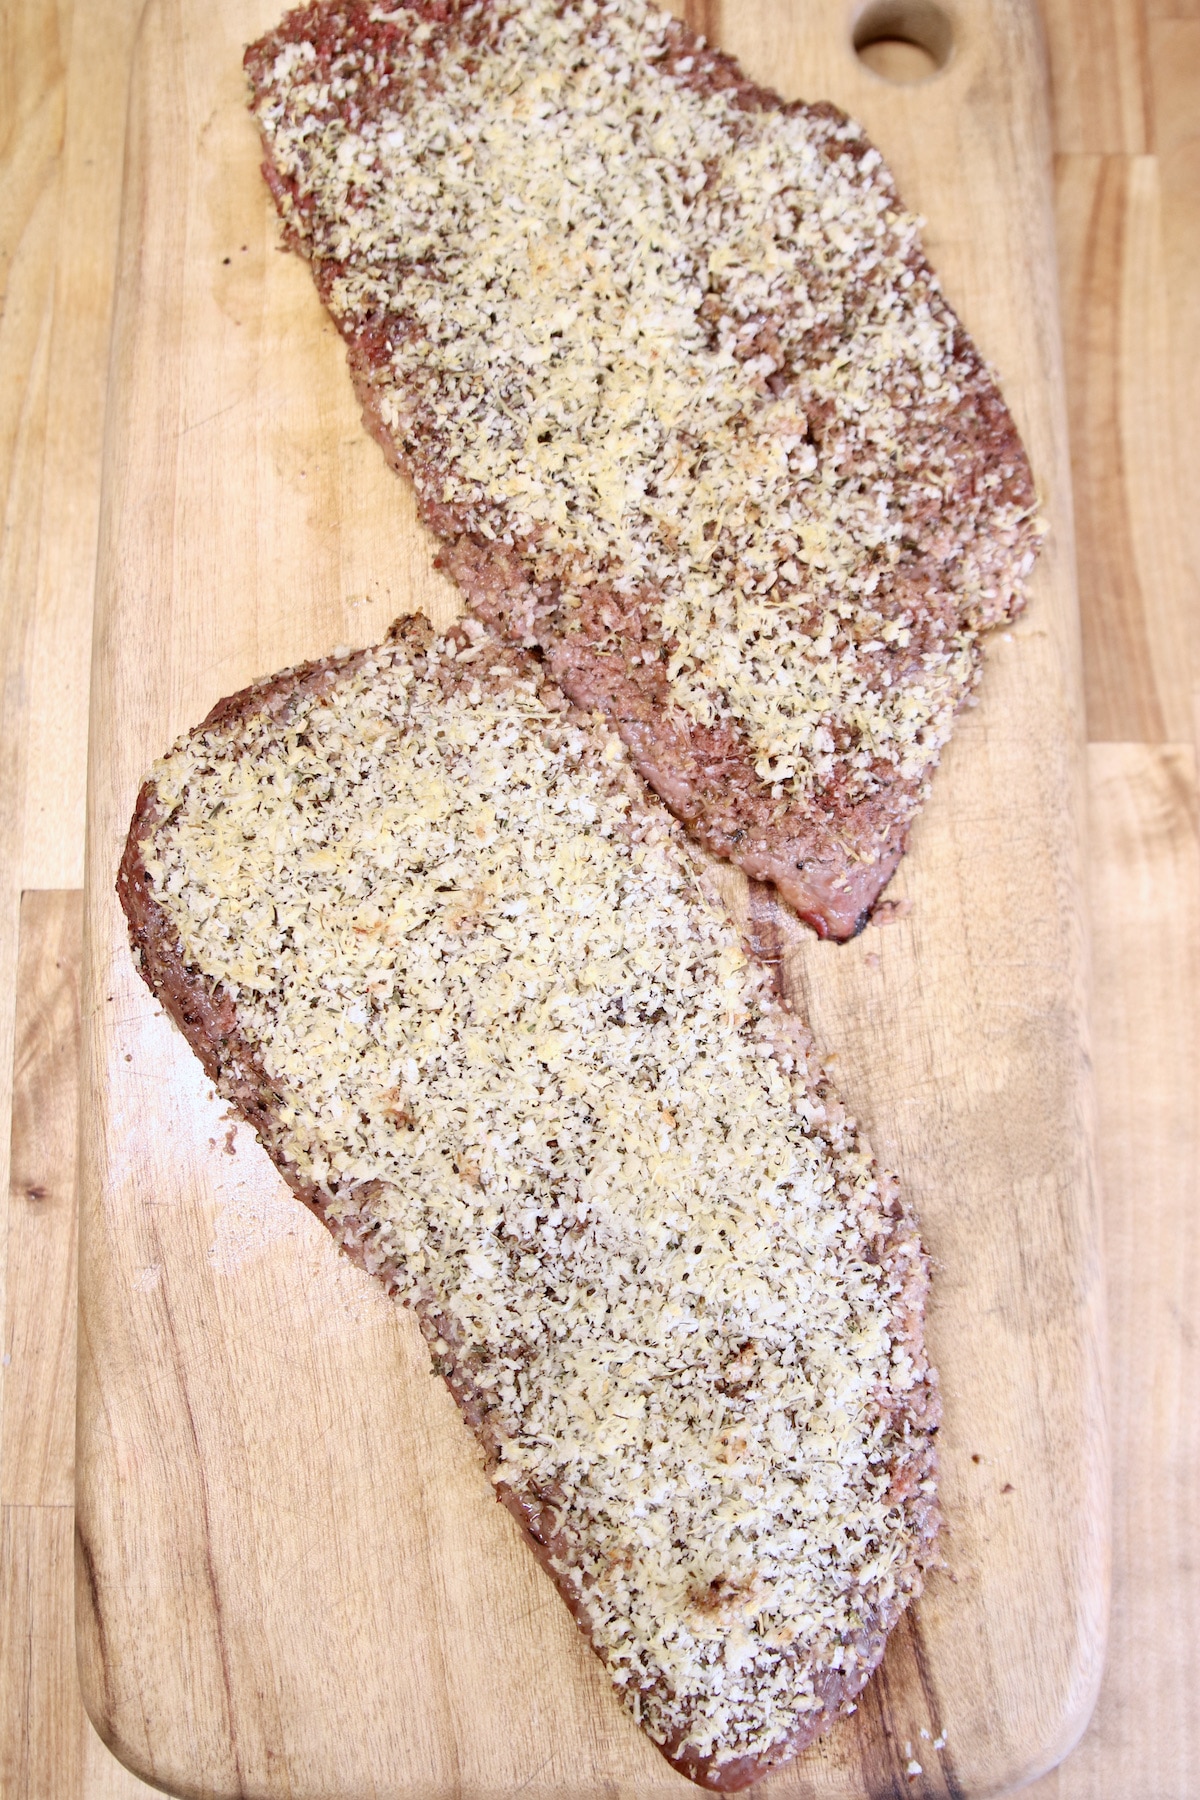 Grilled sirloin steaks resting on cutting board.